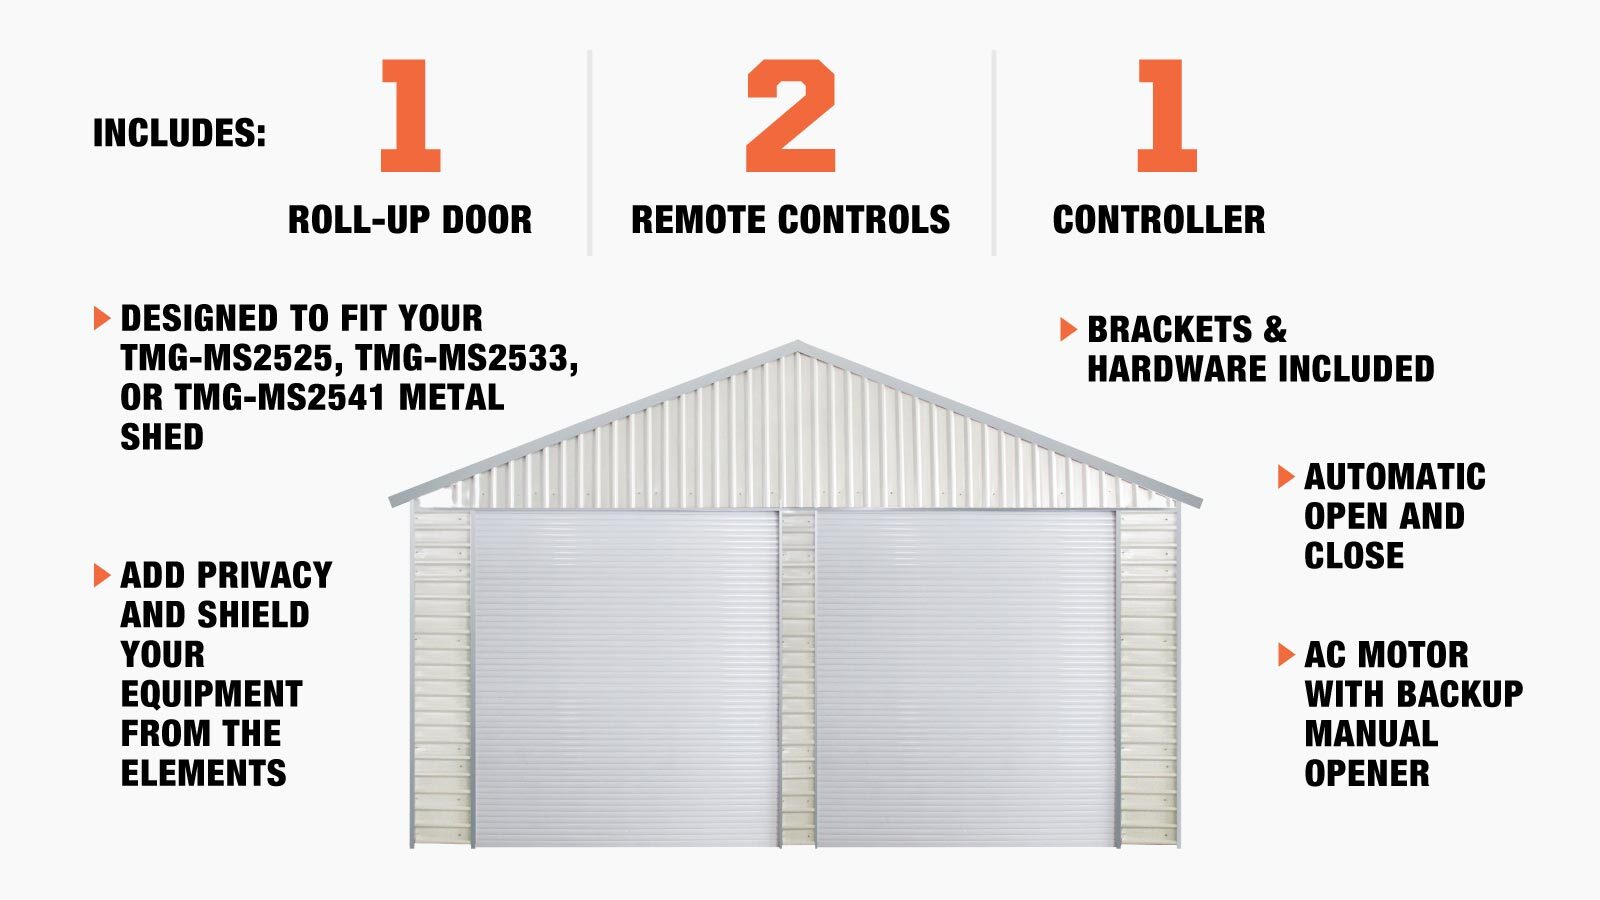 TMG Industrial Motorized Roll-Up Door Kit for TMG-MS25 Series Metal Barn Sheds, With Two Remote Controls, AC Motor, TMG-MS2500-RD101-description-image